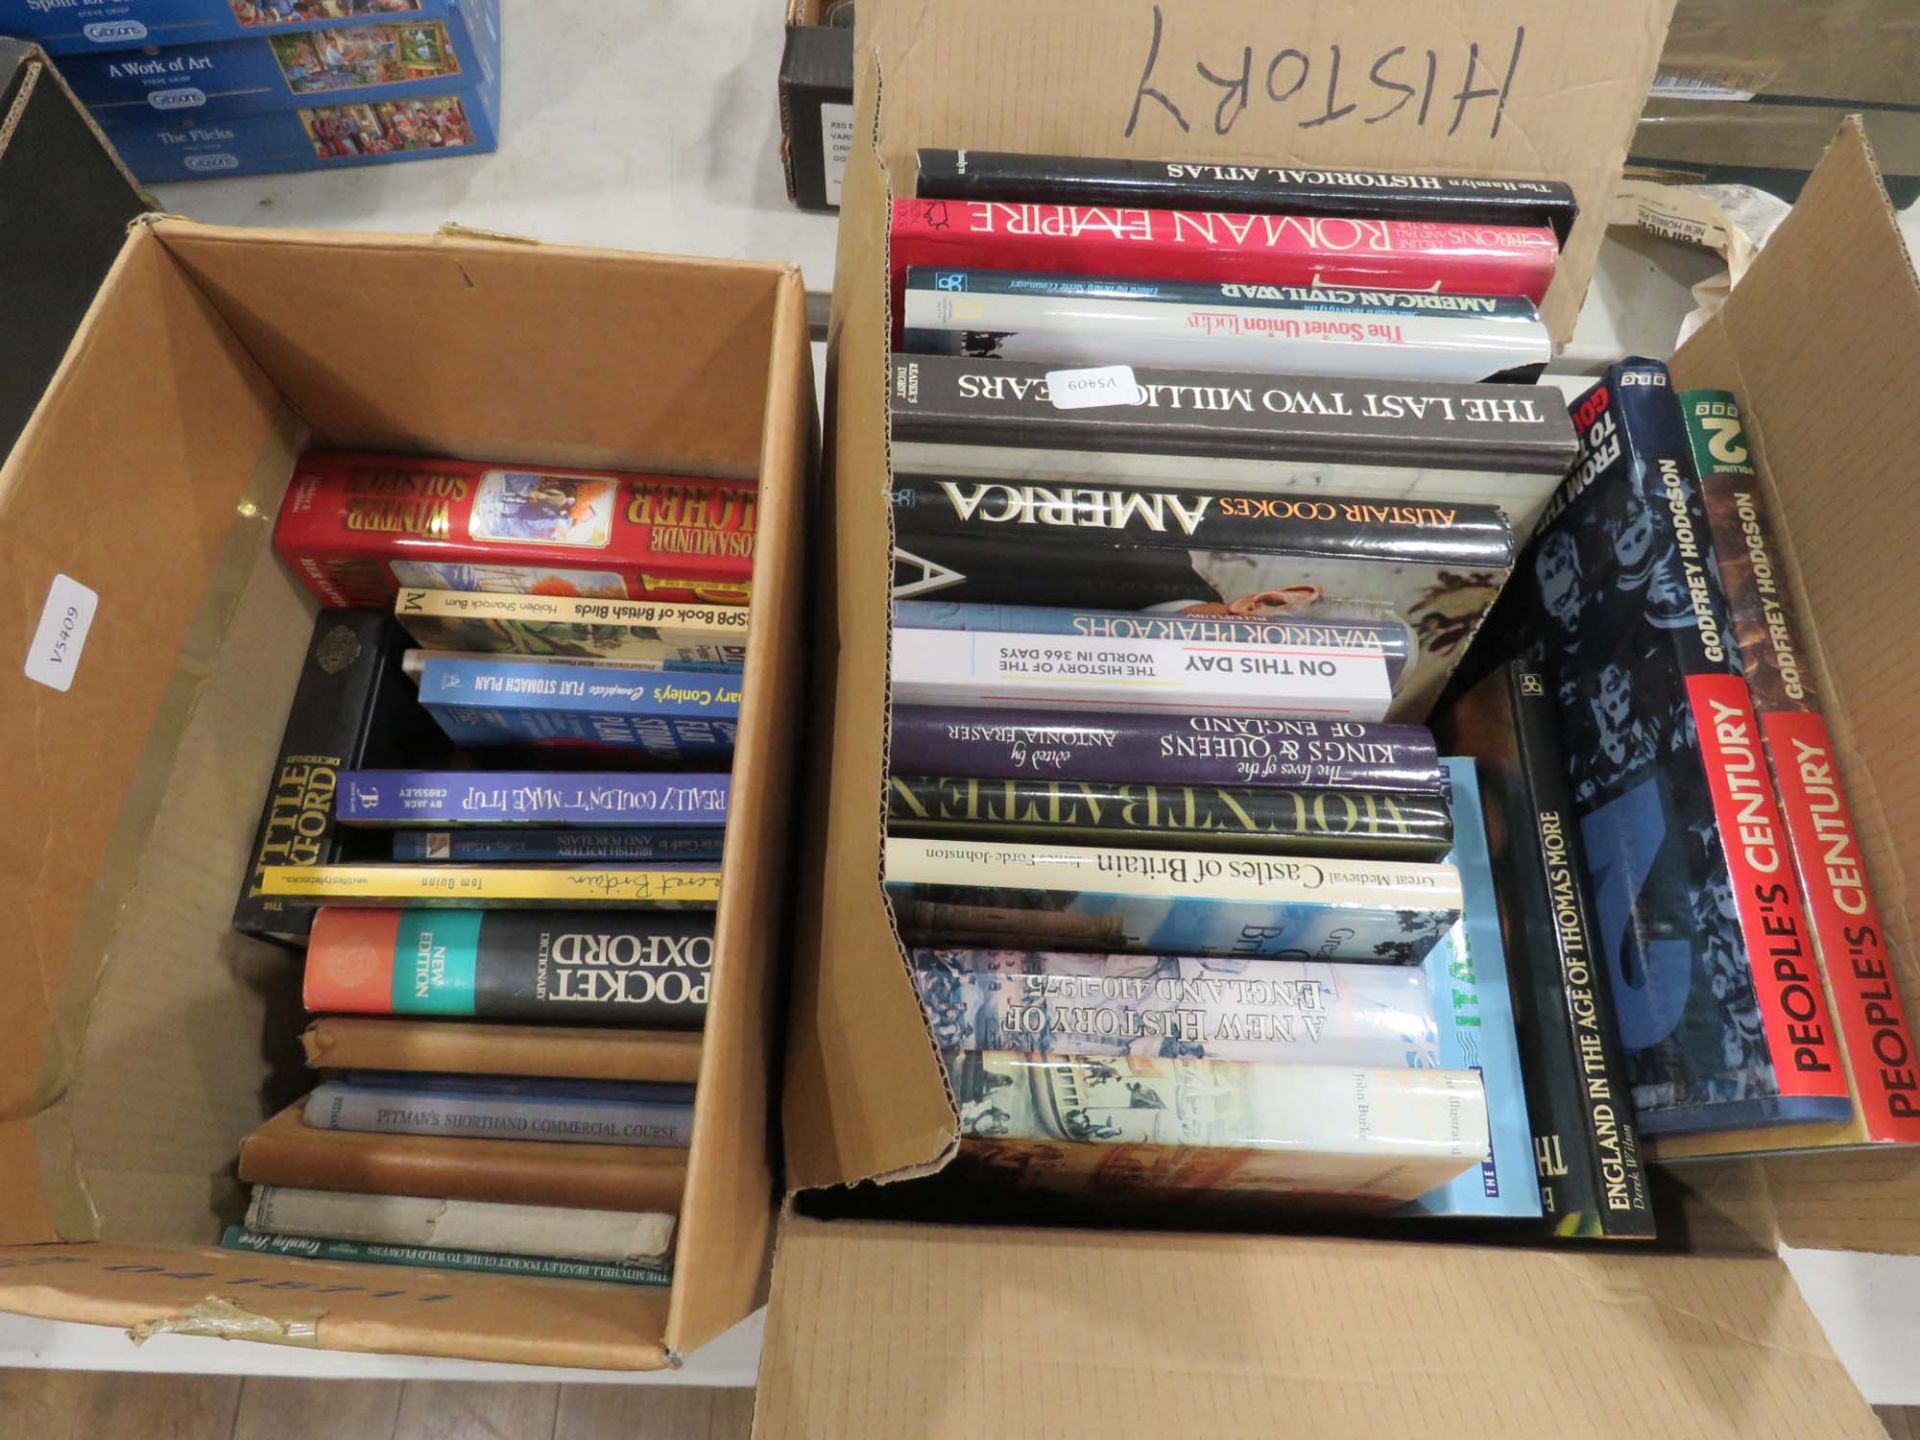 2 boxes containing dictionaries, childrens novels and reference books